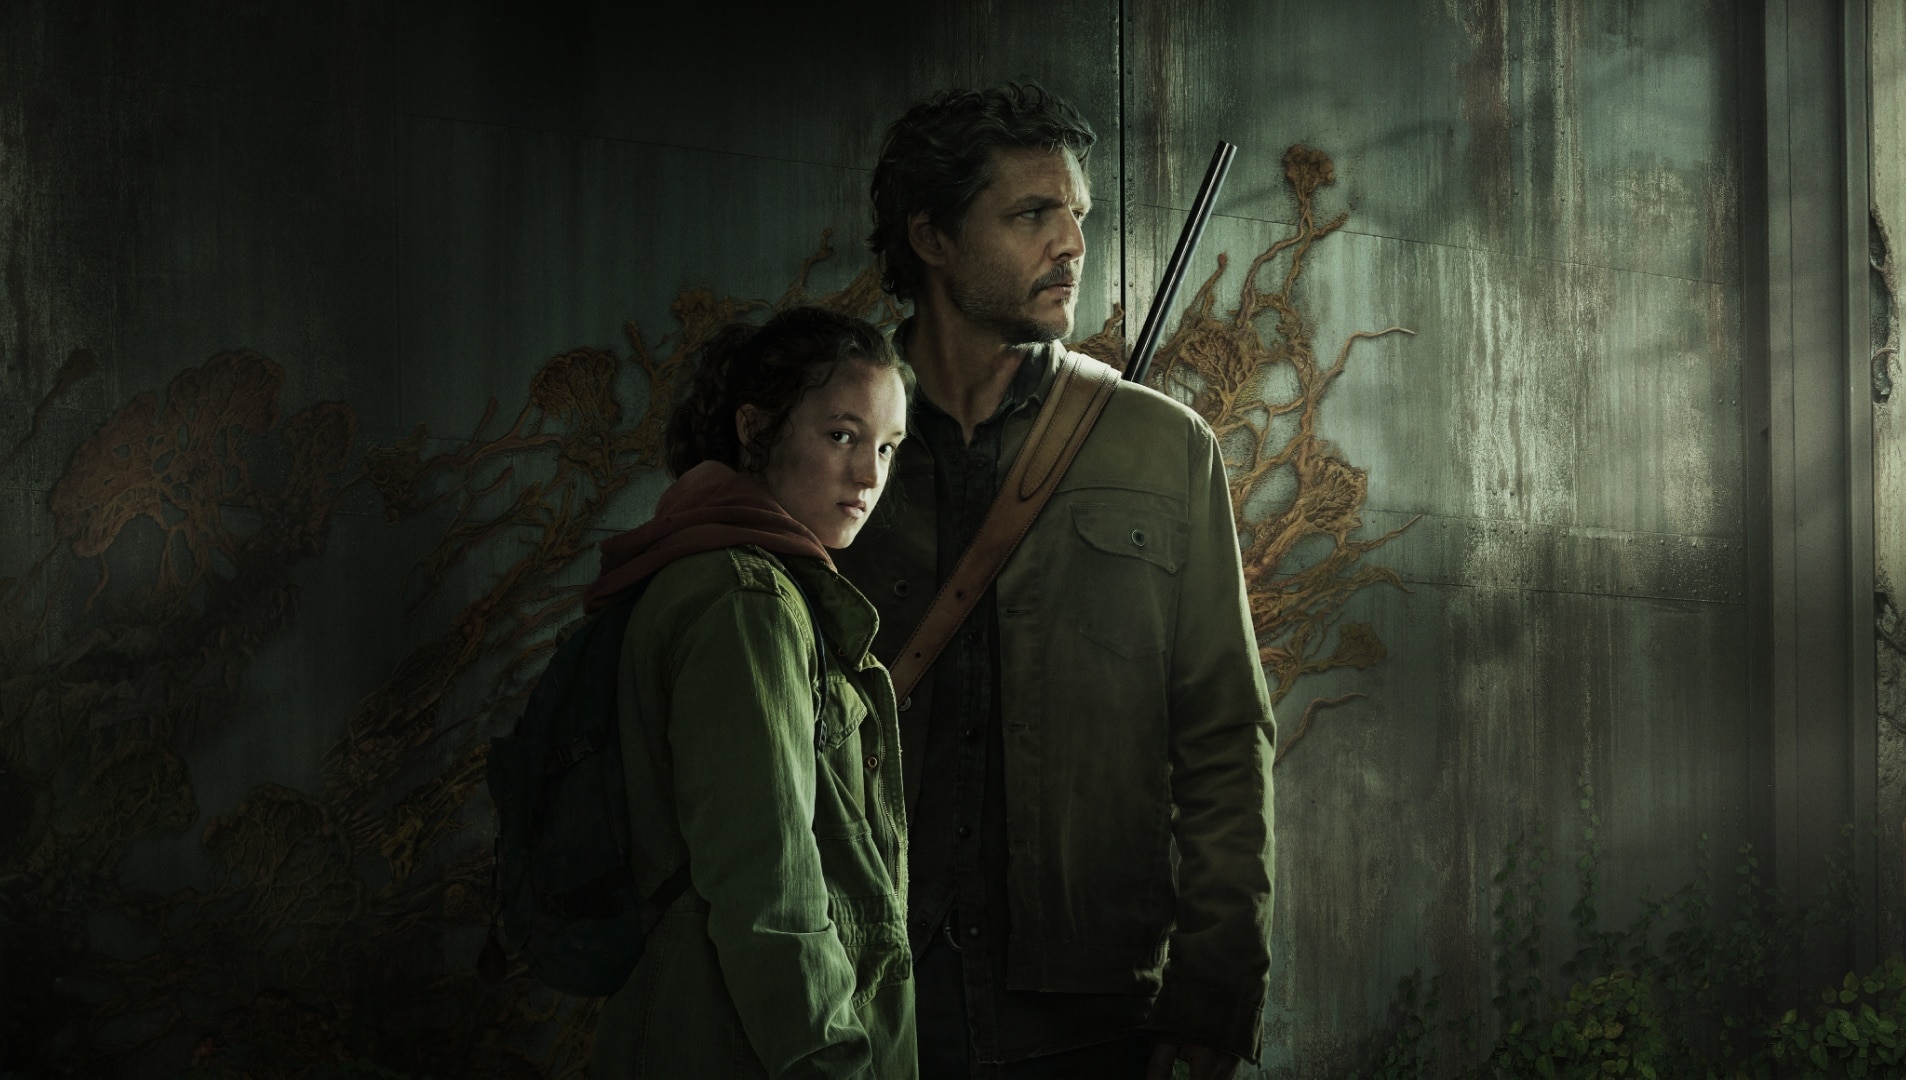 The Last of Us: Josh and Davie Talk Last of Us Episode 2 + The